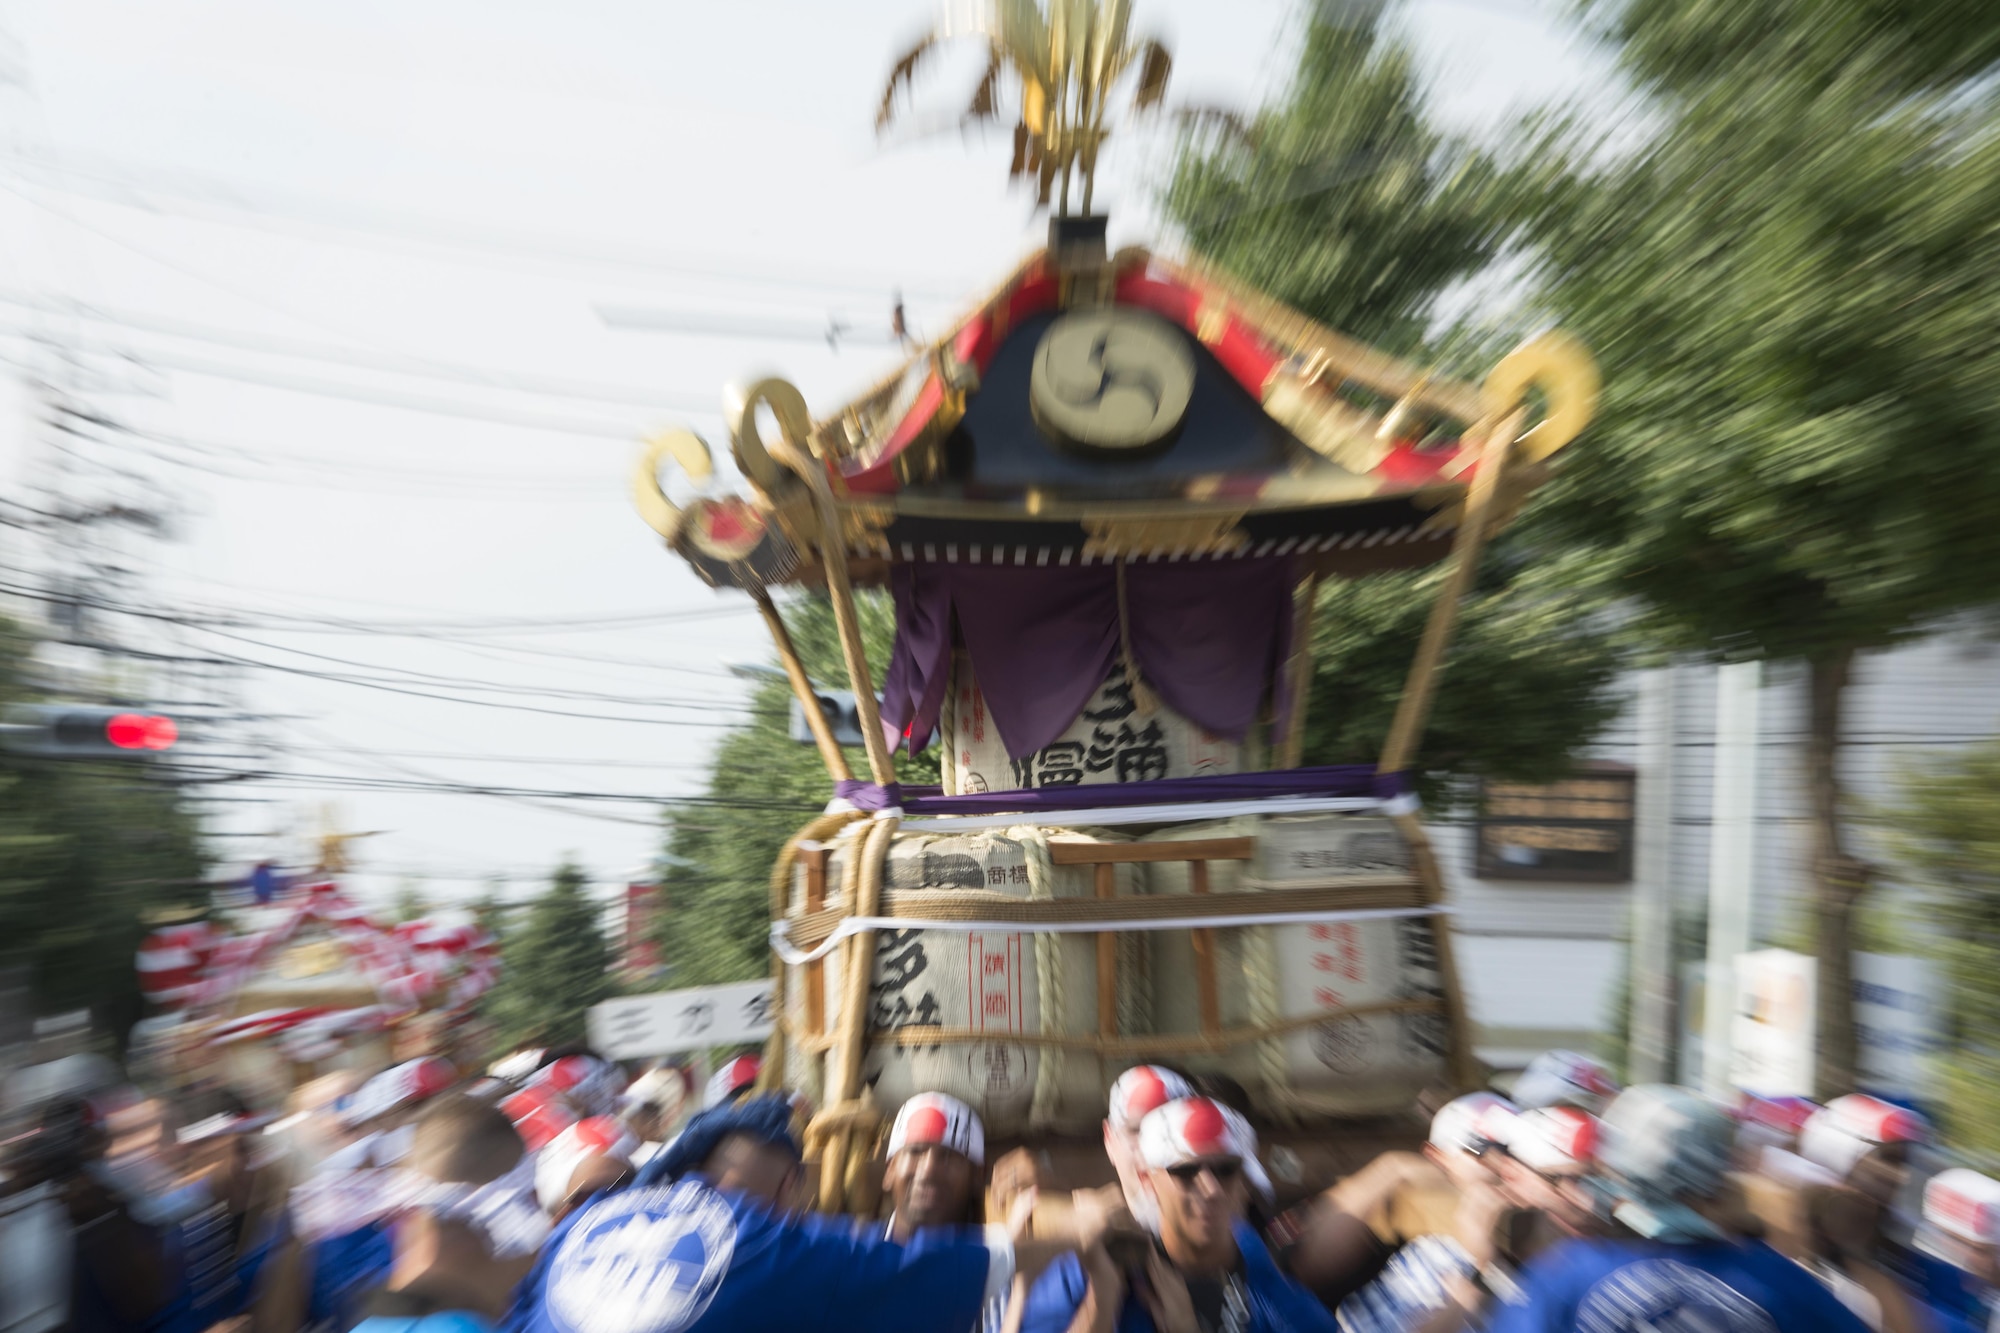 Members of Yokota Air Base carry a mikoshi, or portable shrine, down a road in Fussa City, Japan, Aug. 5, 2016, during the 66th Annual Tanabata Festival. Every year, members of Yokota Air Base participate in the festival by carrying a mikoshi, or portable shrine, dancing in a parade and eating local foods and drinks. (U.S. Air Force photo by Staff Sgt. Cody H. Ramirez/Released)